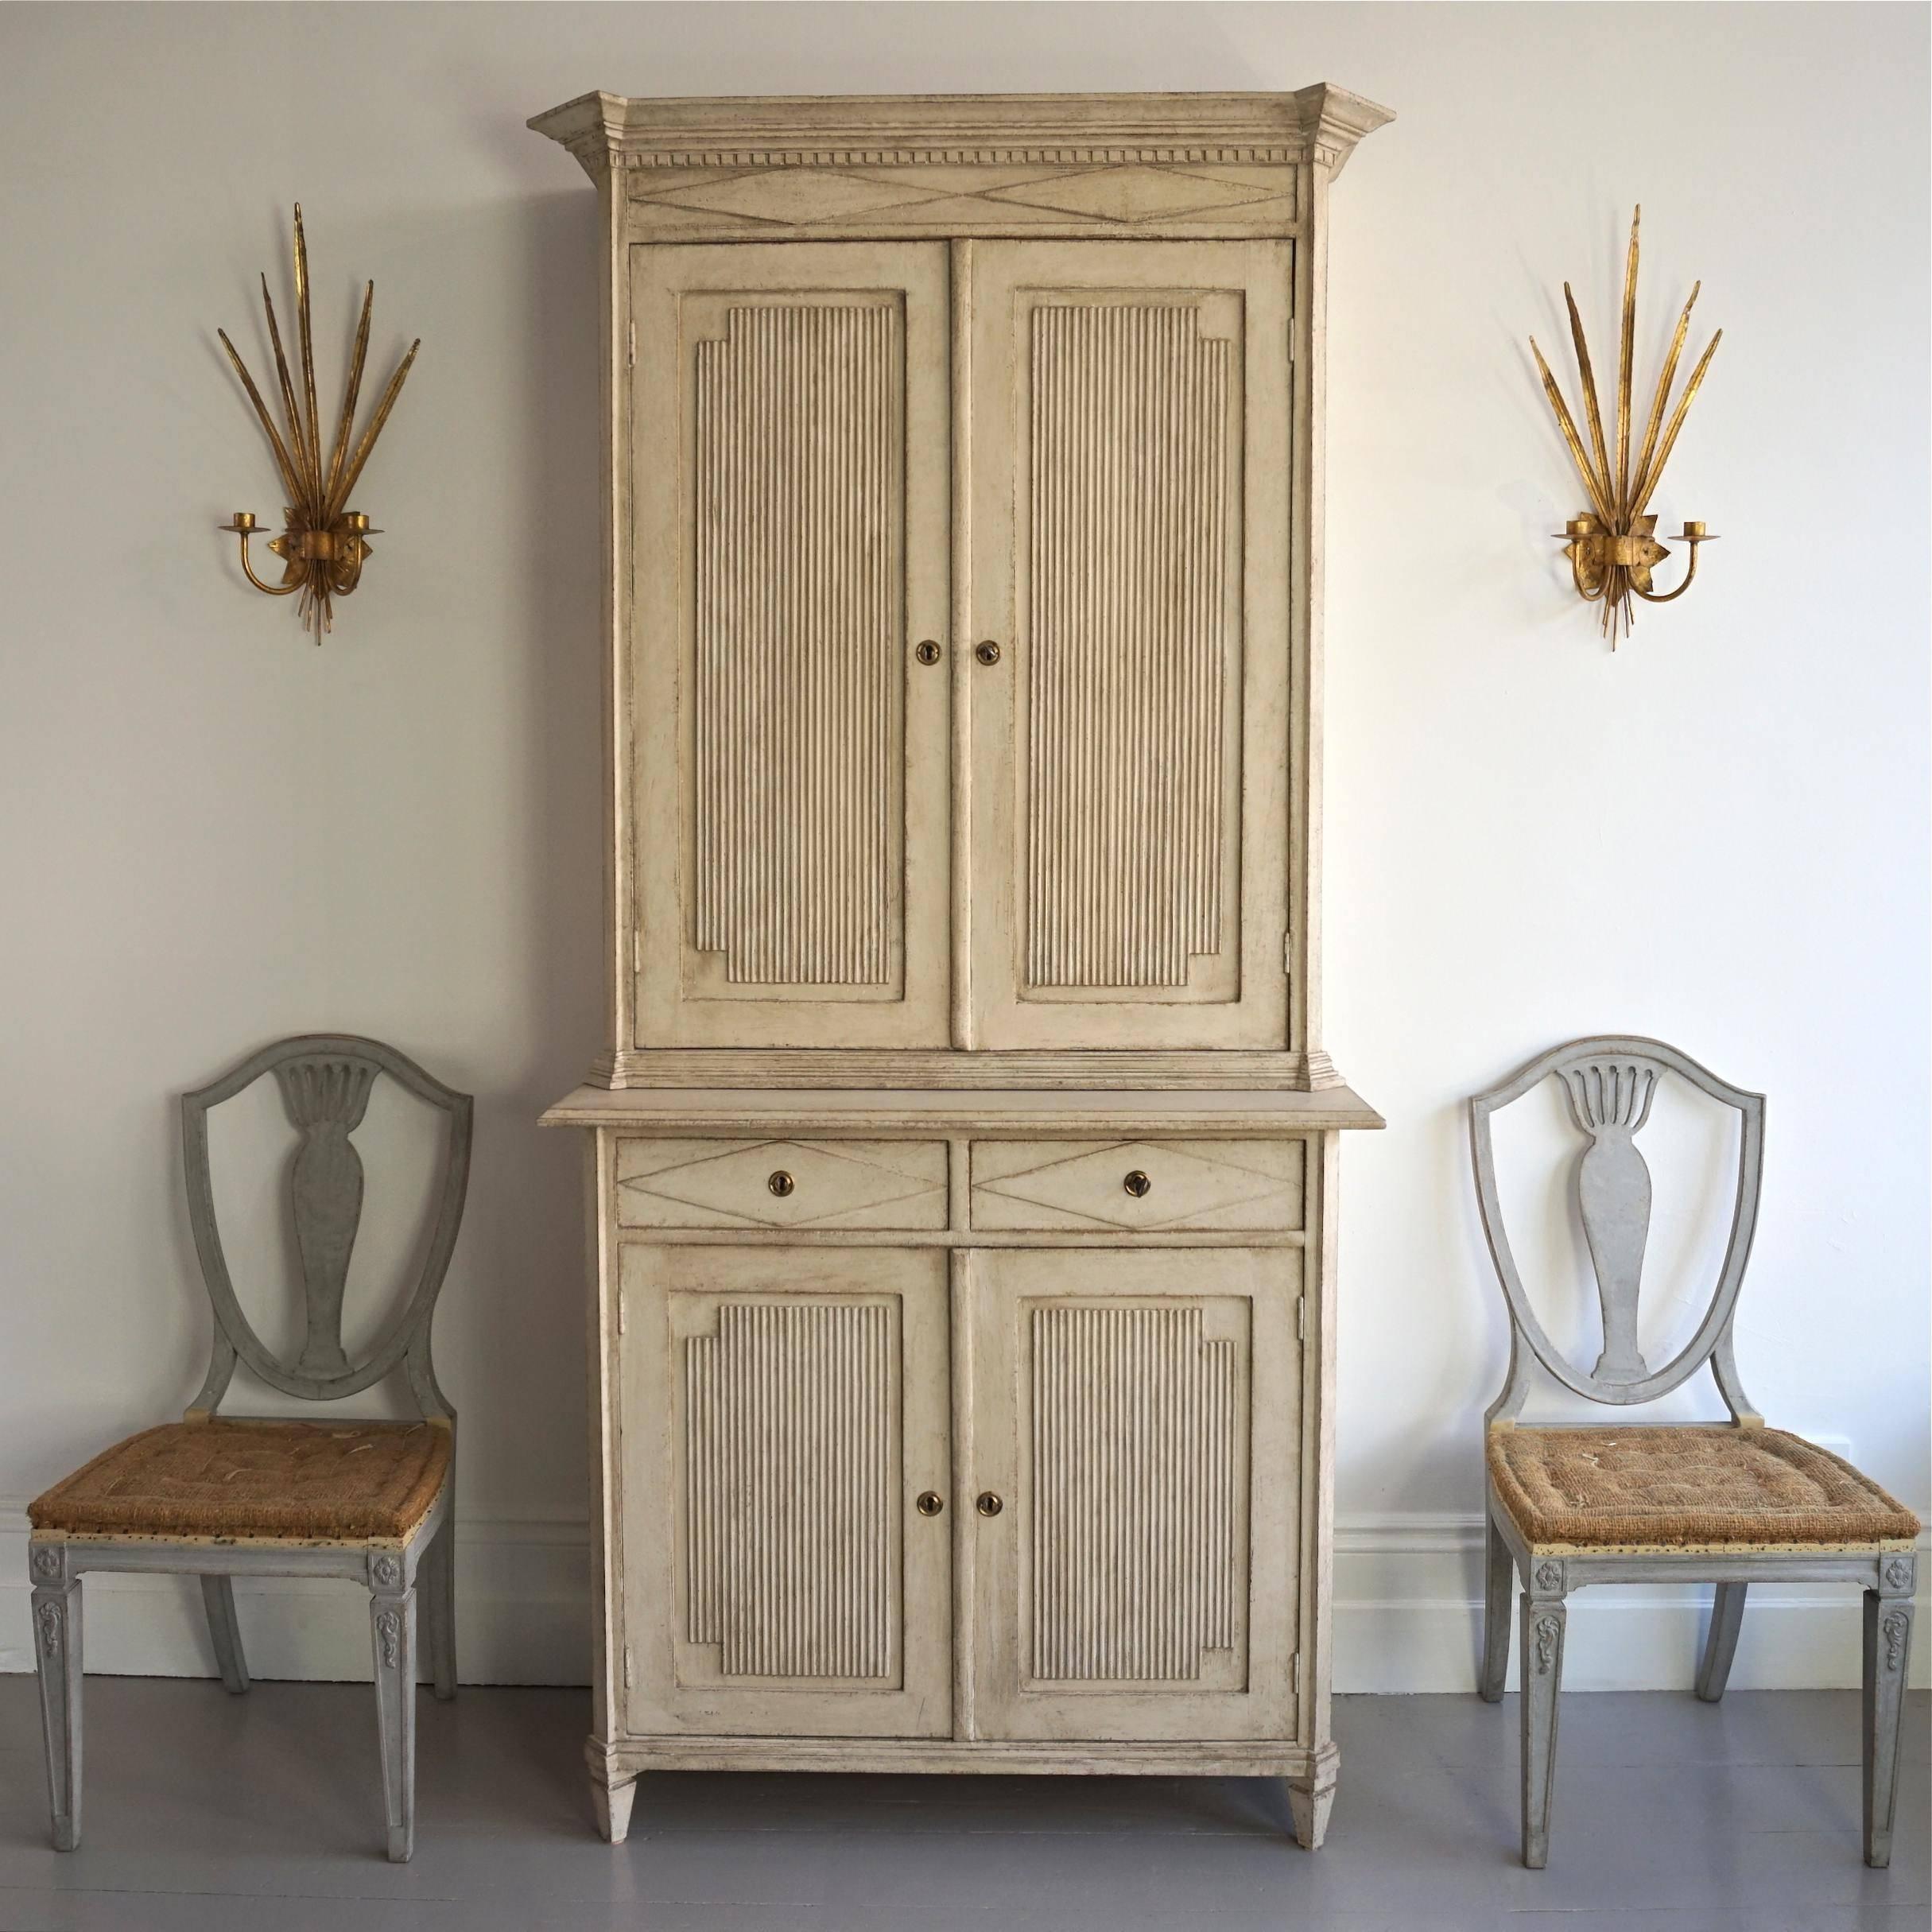 A very fine and richly carved 19th century Gustavian style cabinet featuring a beautiful overhanging pediment cornice with canted corners, dentil trim and diamond details, decorative panelled cupboard doors with vertical reeding, two drawers with